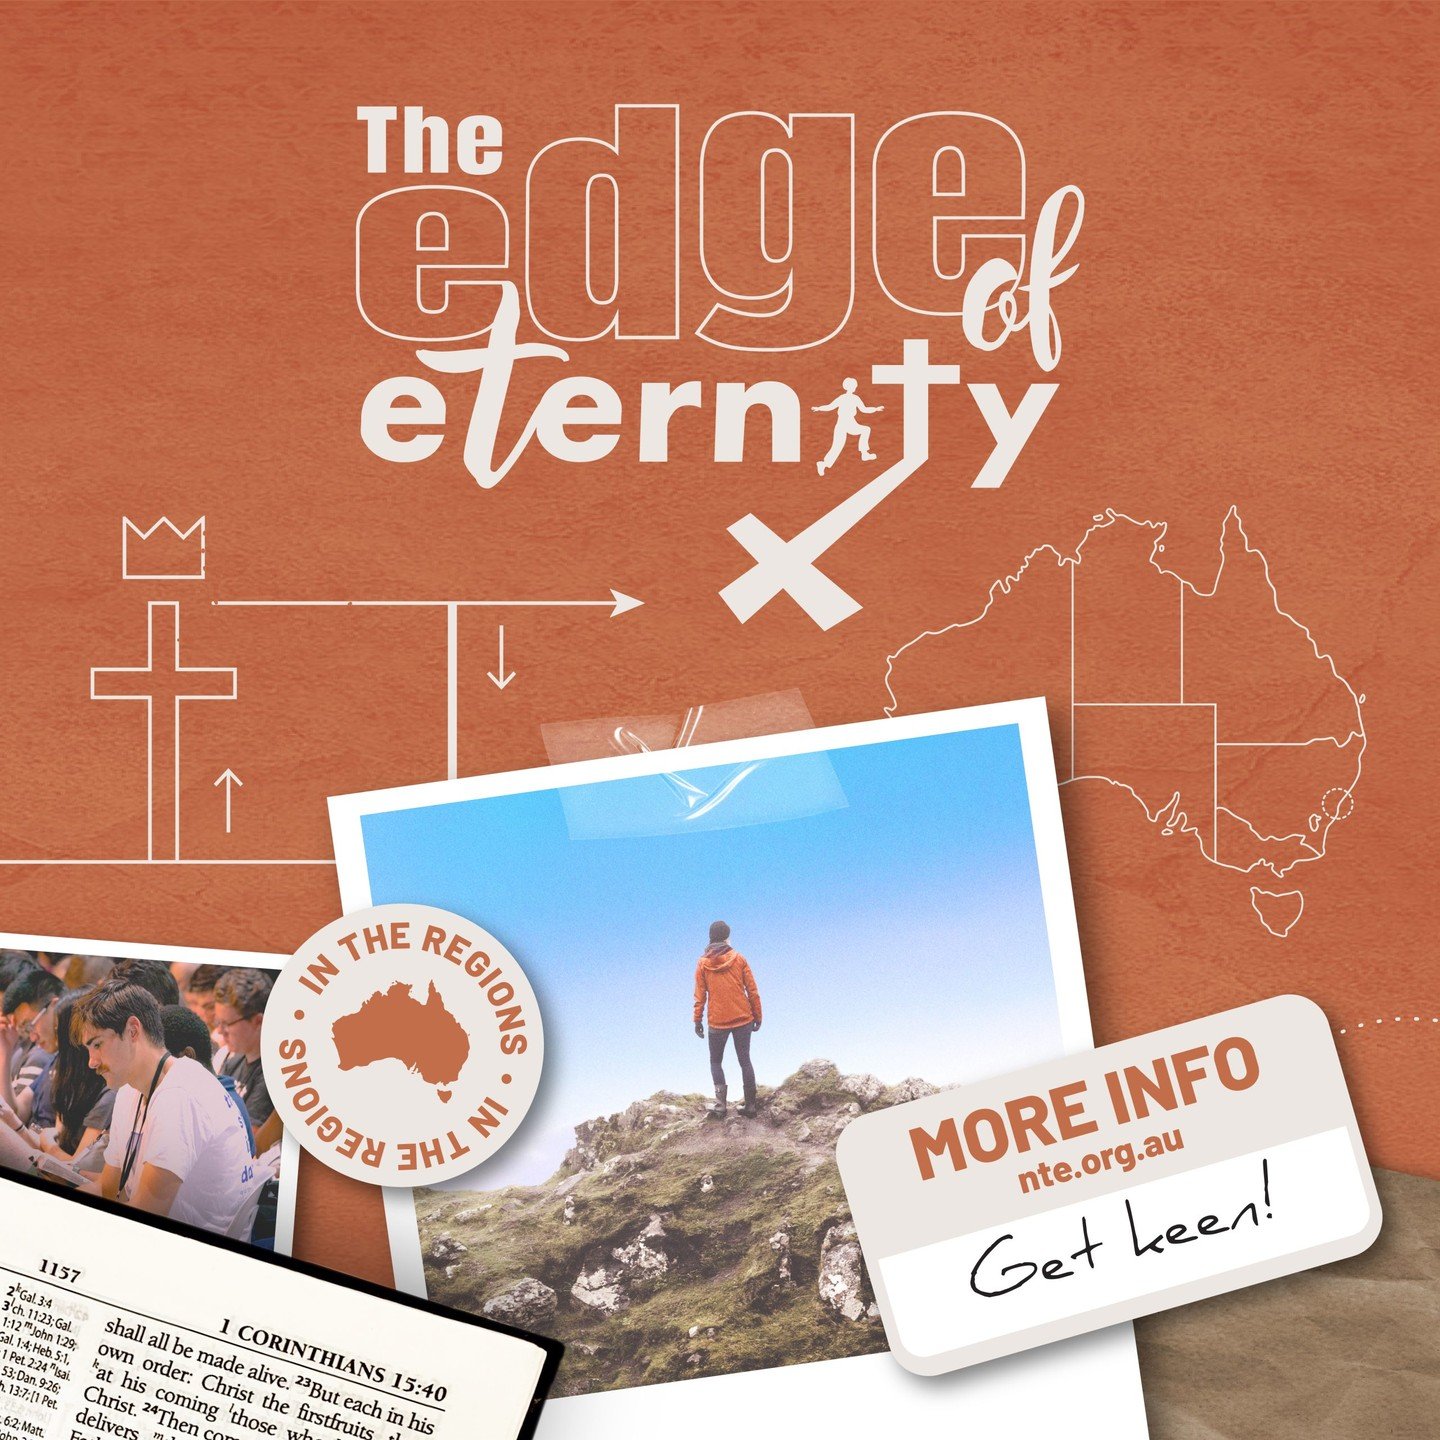 ✍ This year's theme is &quot;The Edge of Eternity&quot;. Despite NTE2024 happening in various regions at various times, we will be united by the same theme and the same gospel. #NTE2024 #IntheRegions #TheEdgeofEternity #theme